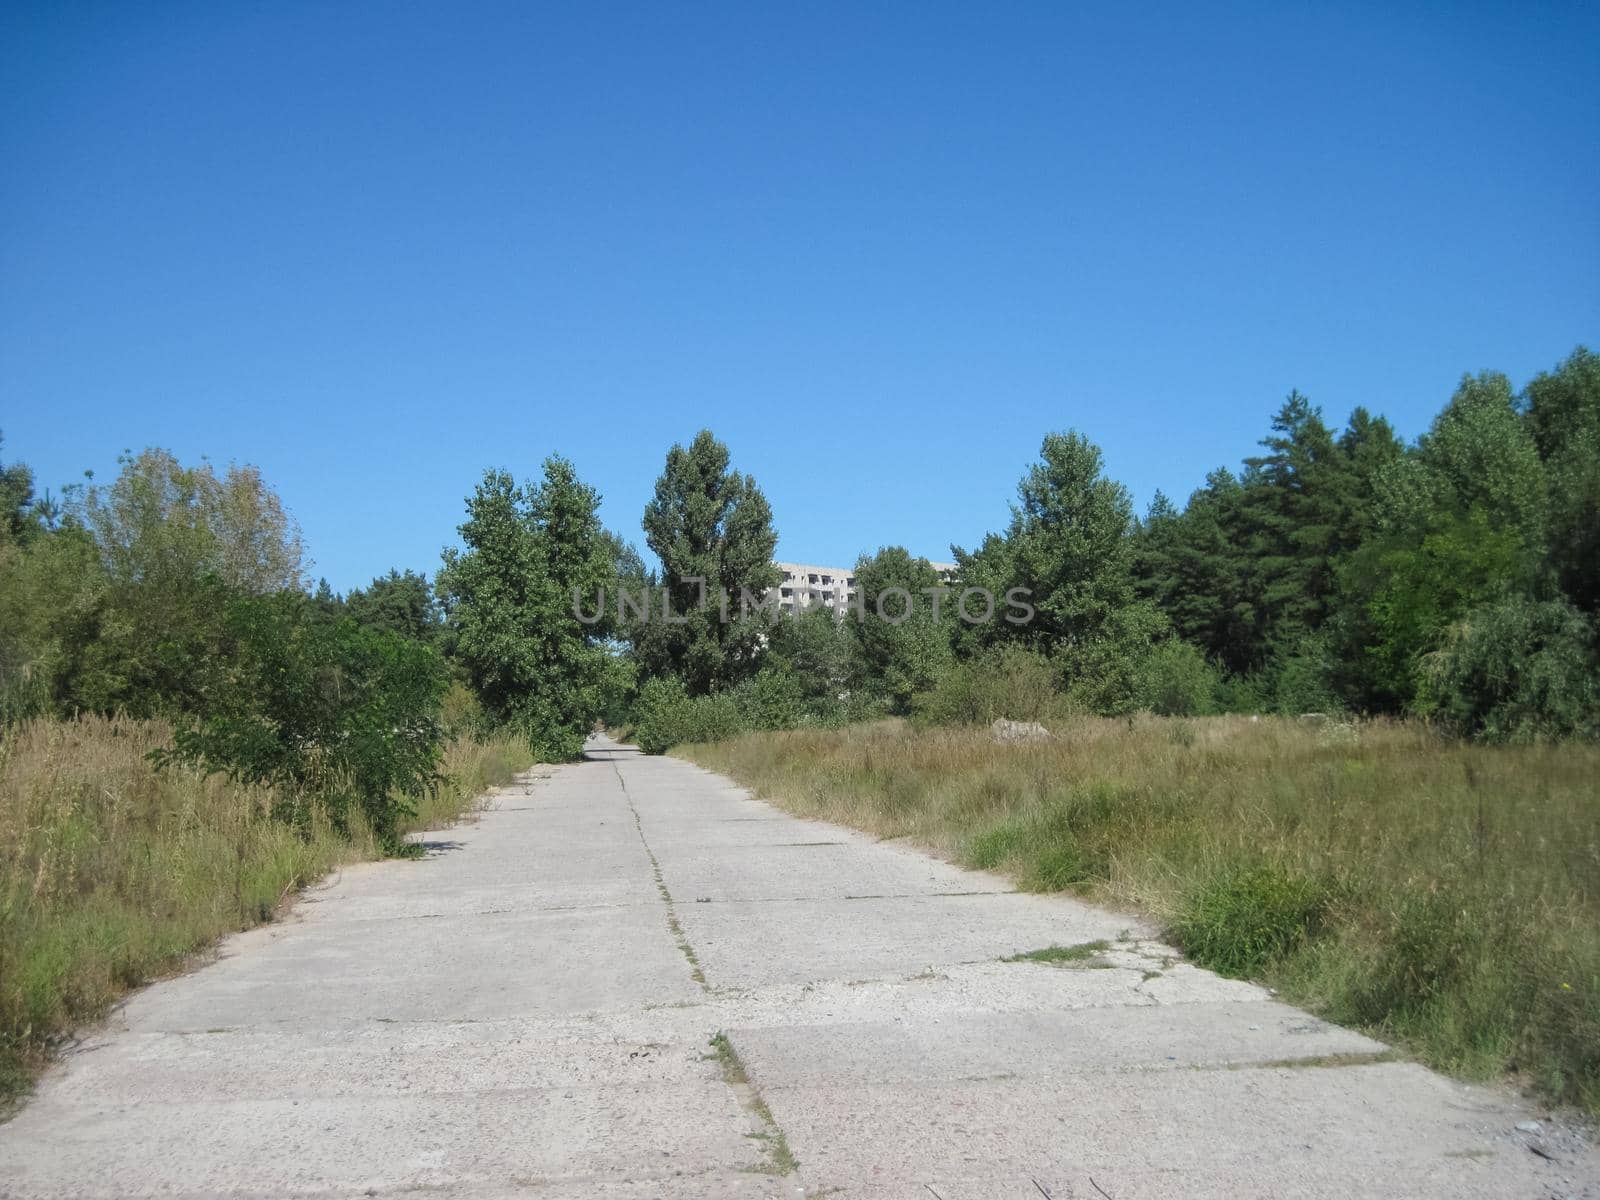 old road is made of concrete slabs. road surface slabs of concrete. by DePo